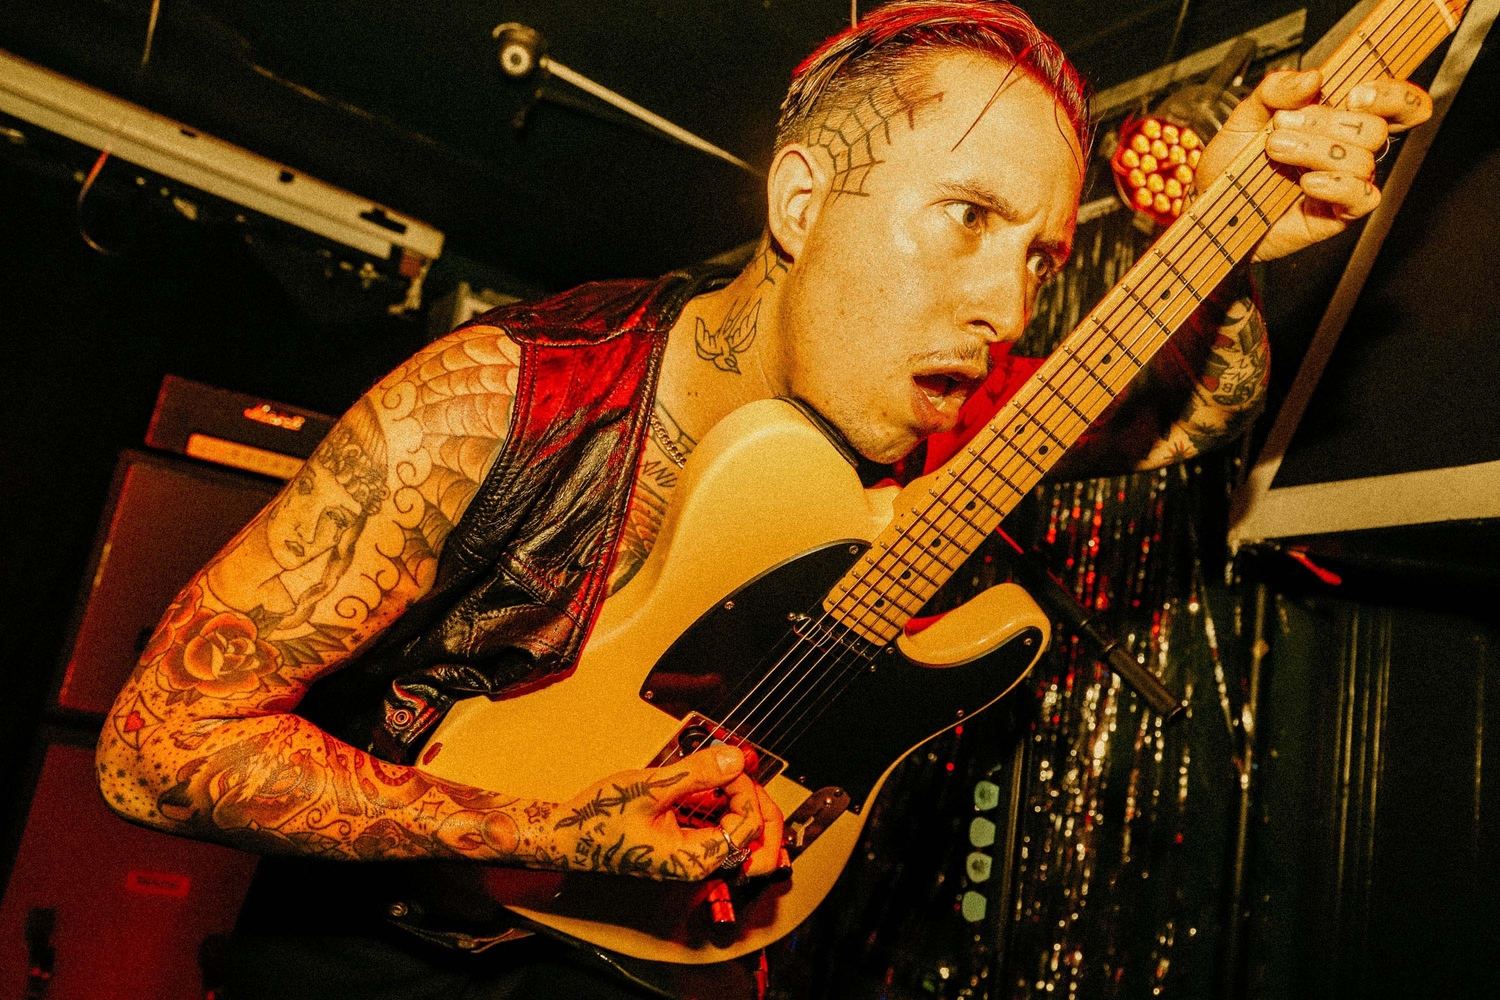 Laurie from Slaves, IDER & more join War Child Safe & Sound industry day